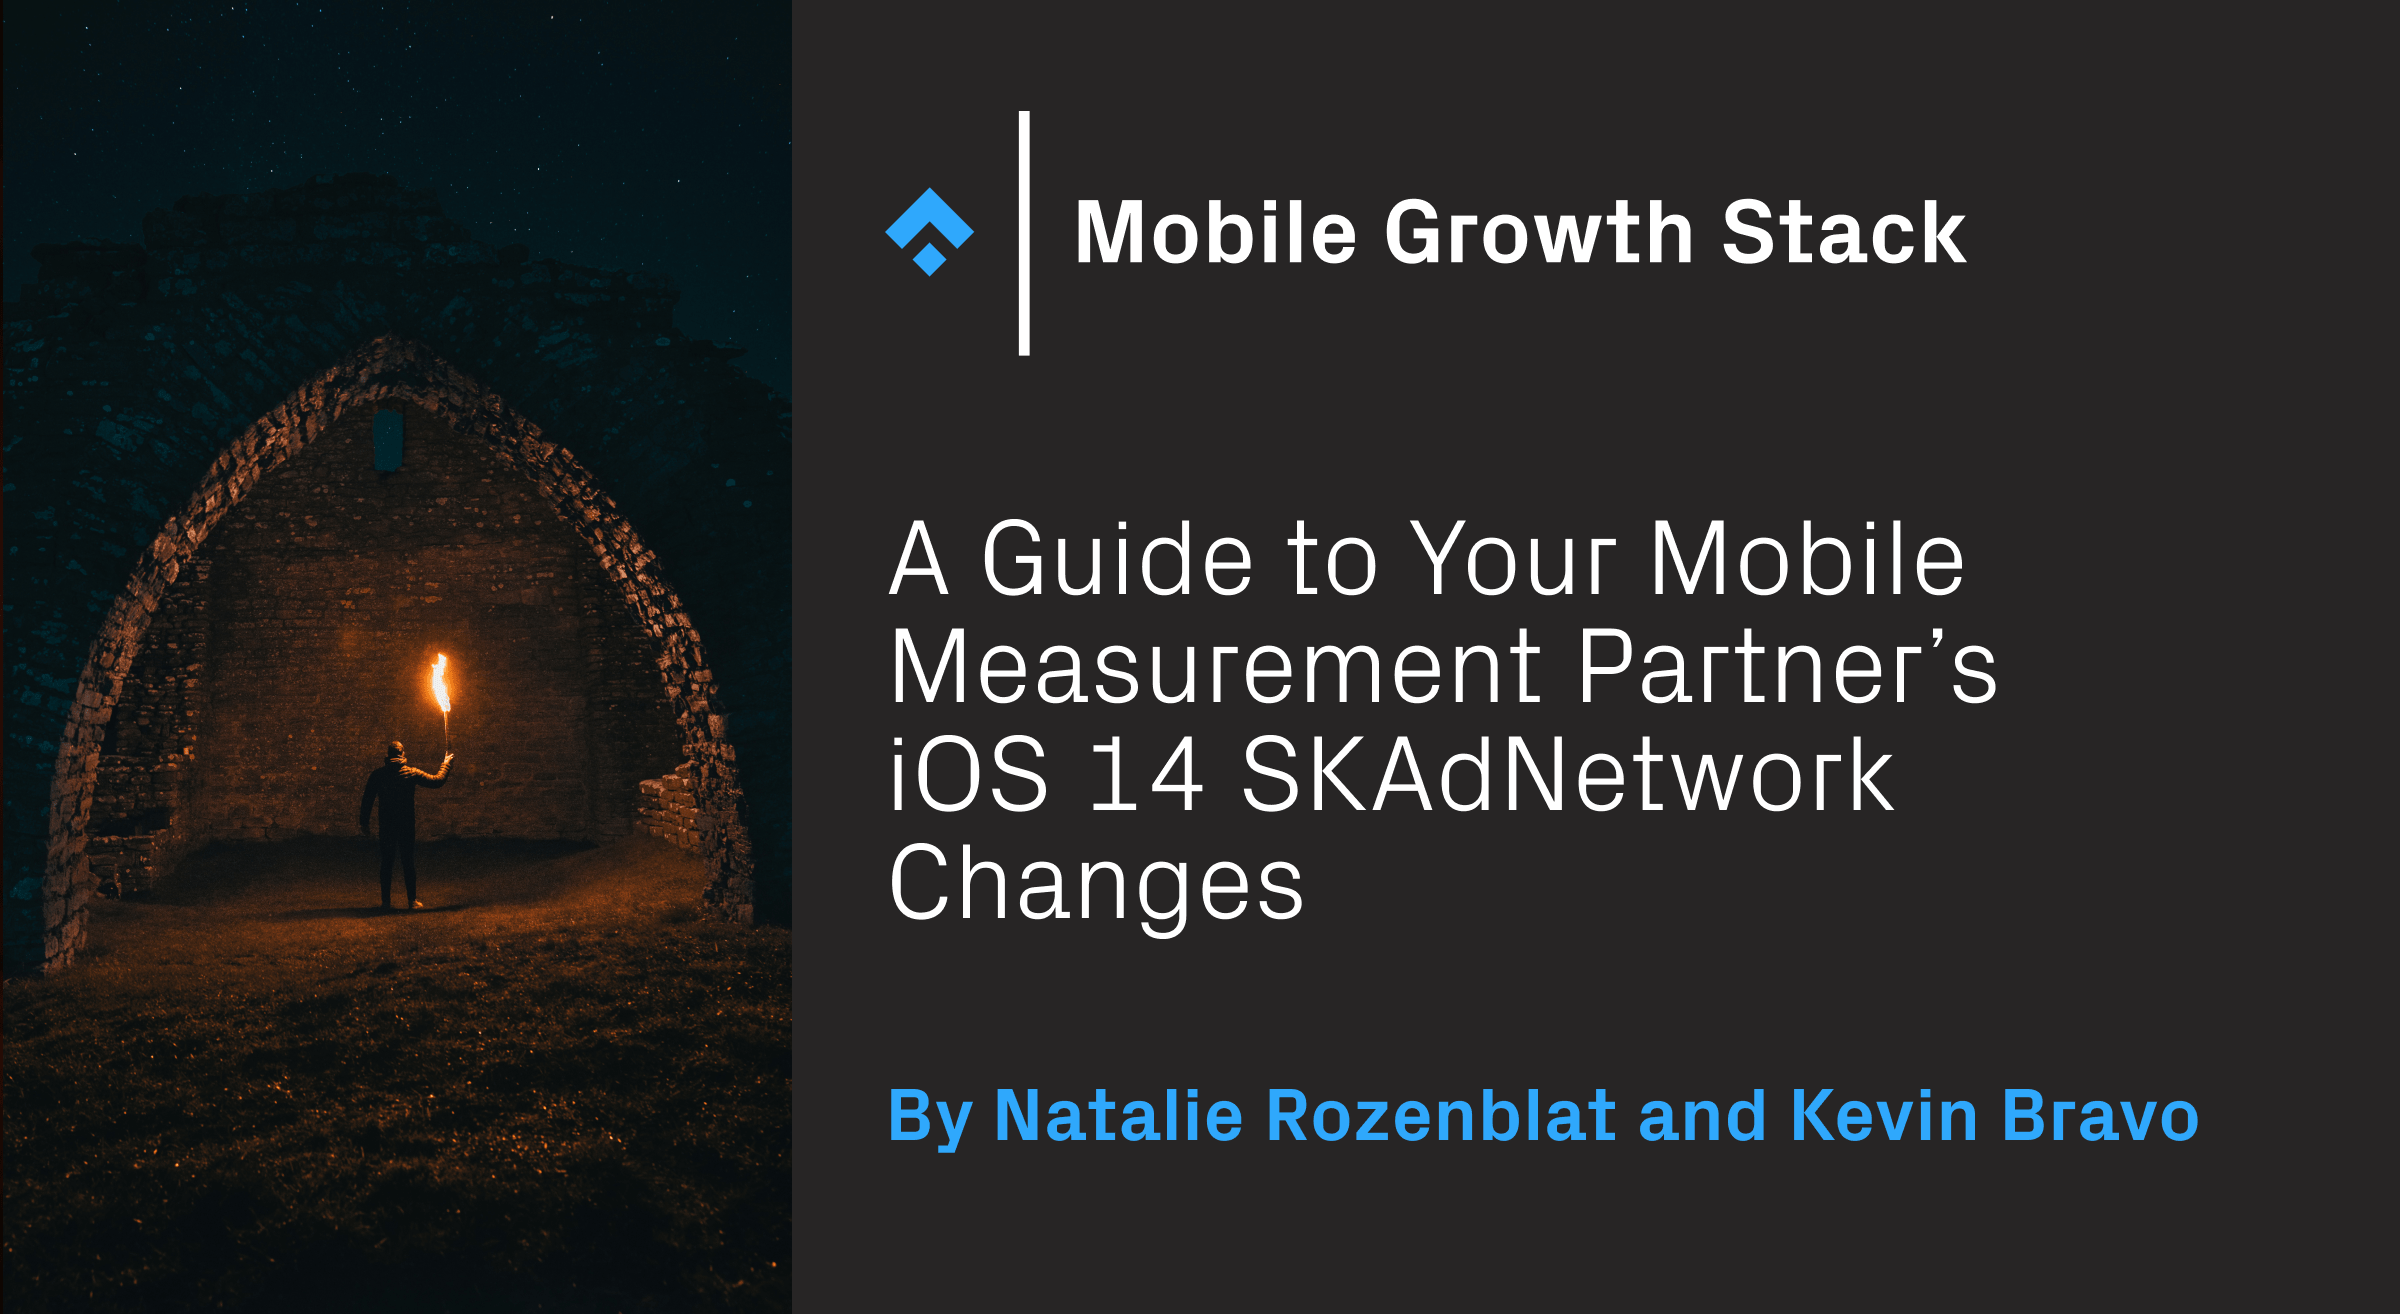 A Guide to Your Mobile Measurement Partner’s iOS 14 SKAdNetwork Changes